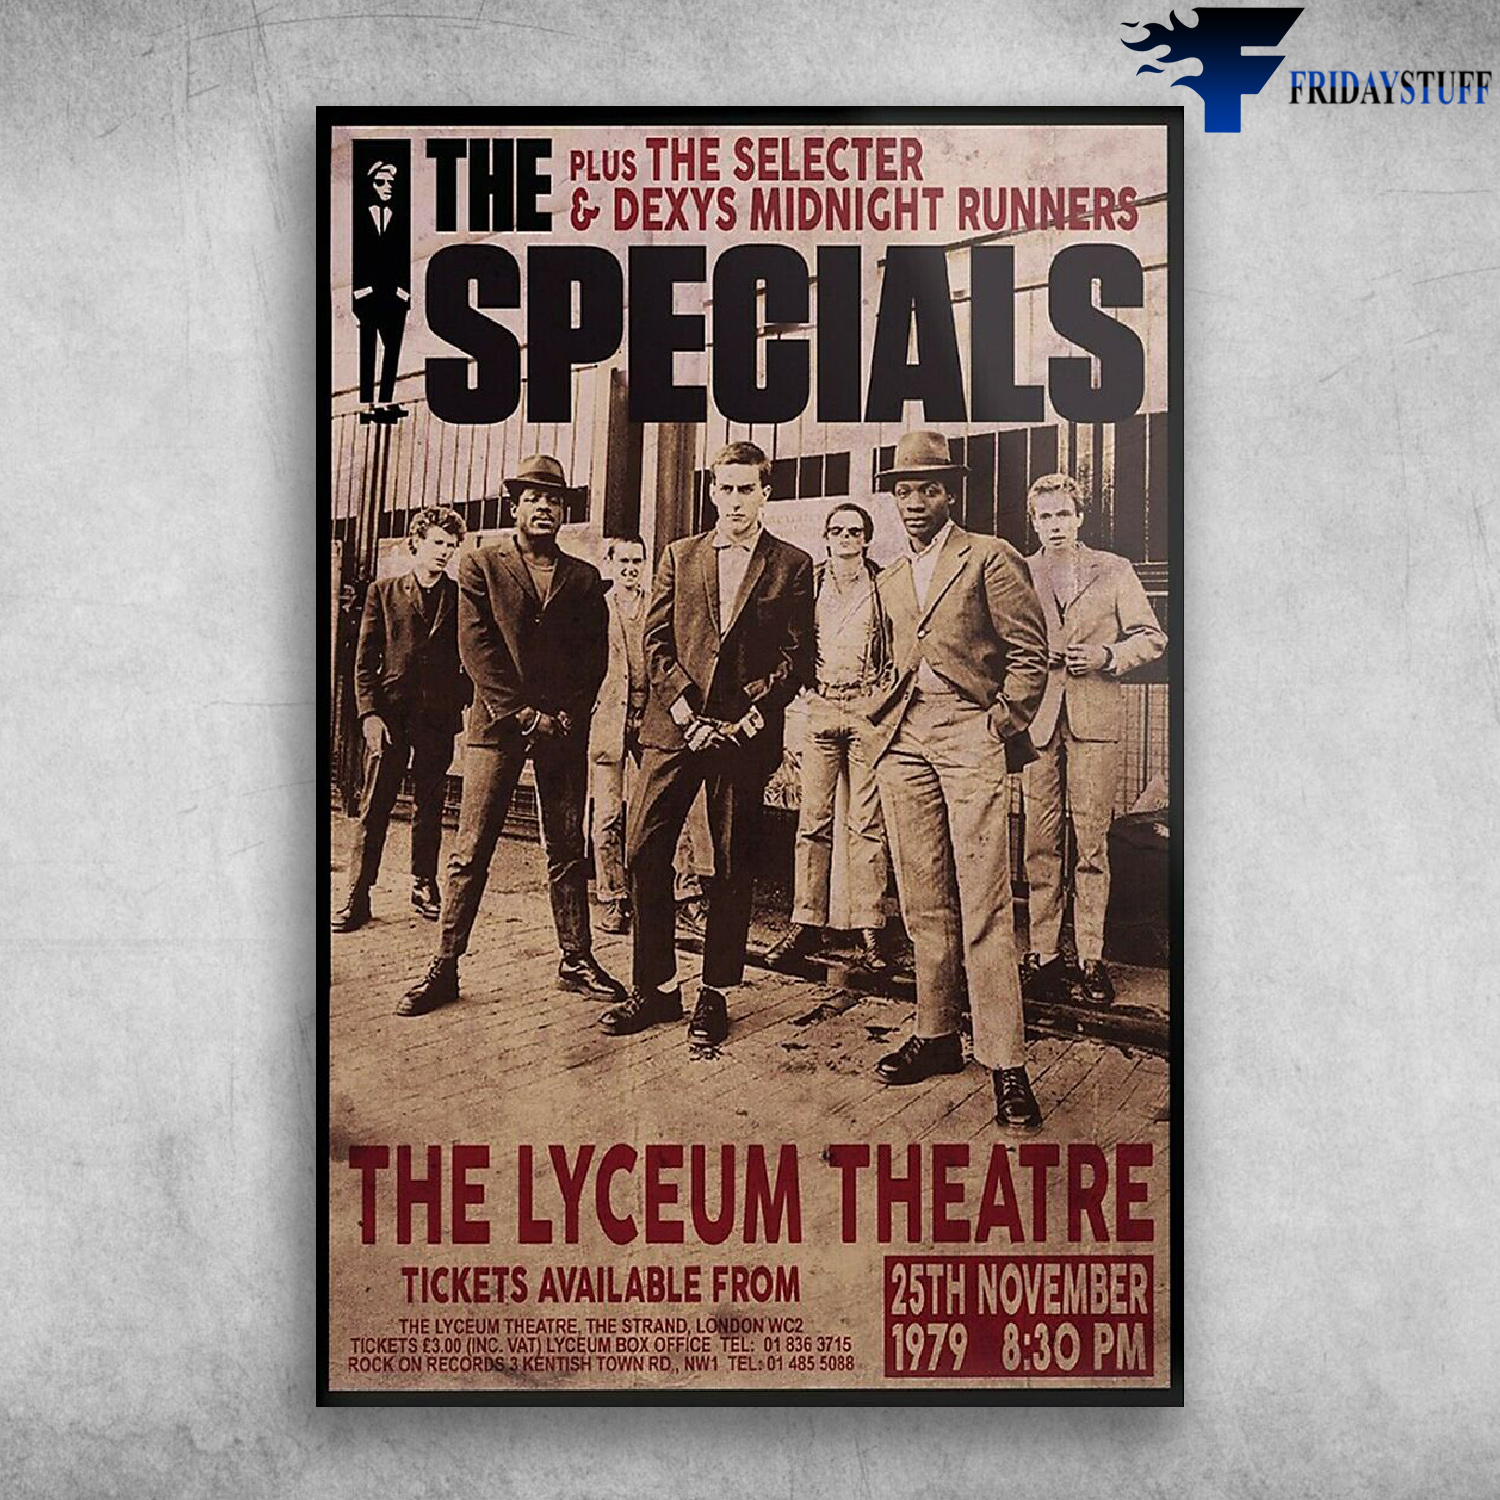 The Plus The Selector & Dexys Midnight Runners - The Specials The Lyceum Theatre